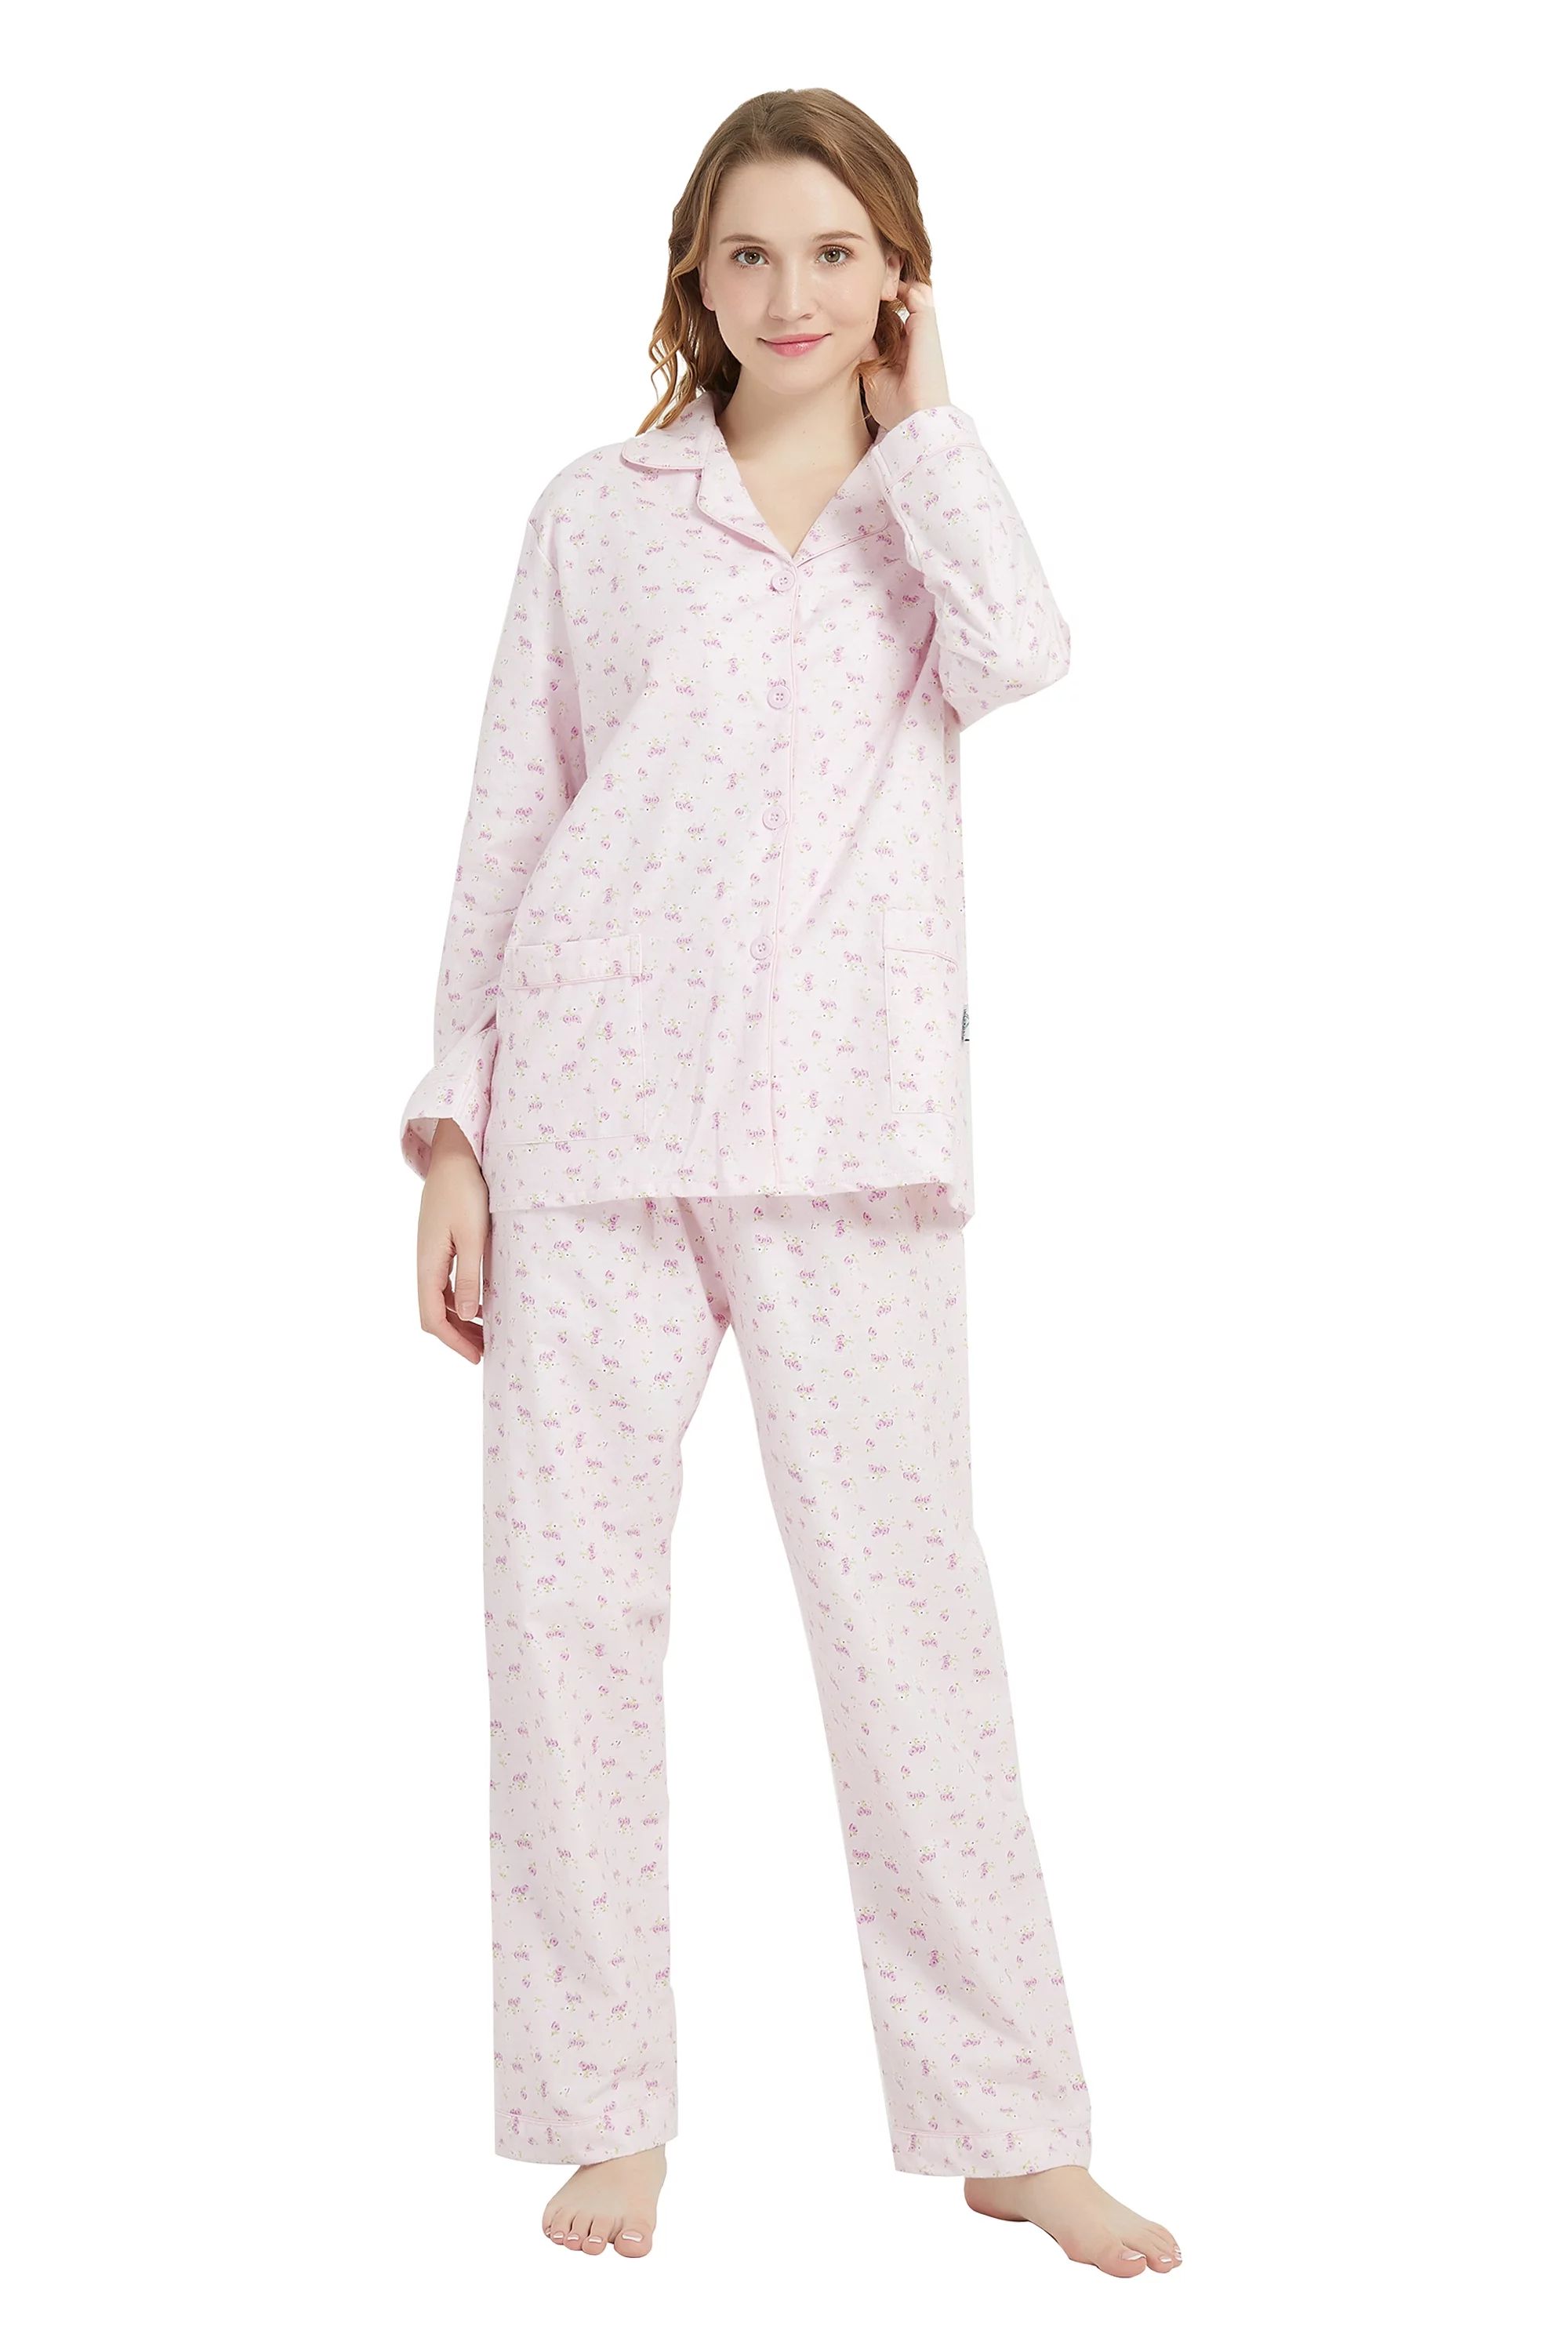 GLOBAL 100% Cotton Comfy Flannel Pajamas for Women 2-Piece Warm and Cozy Pj Set of Loungewear But... | Walmart (US)